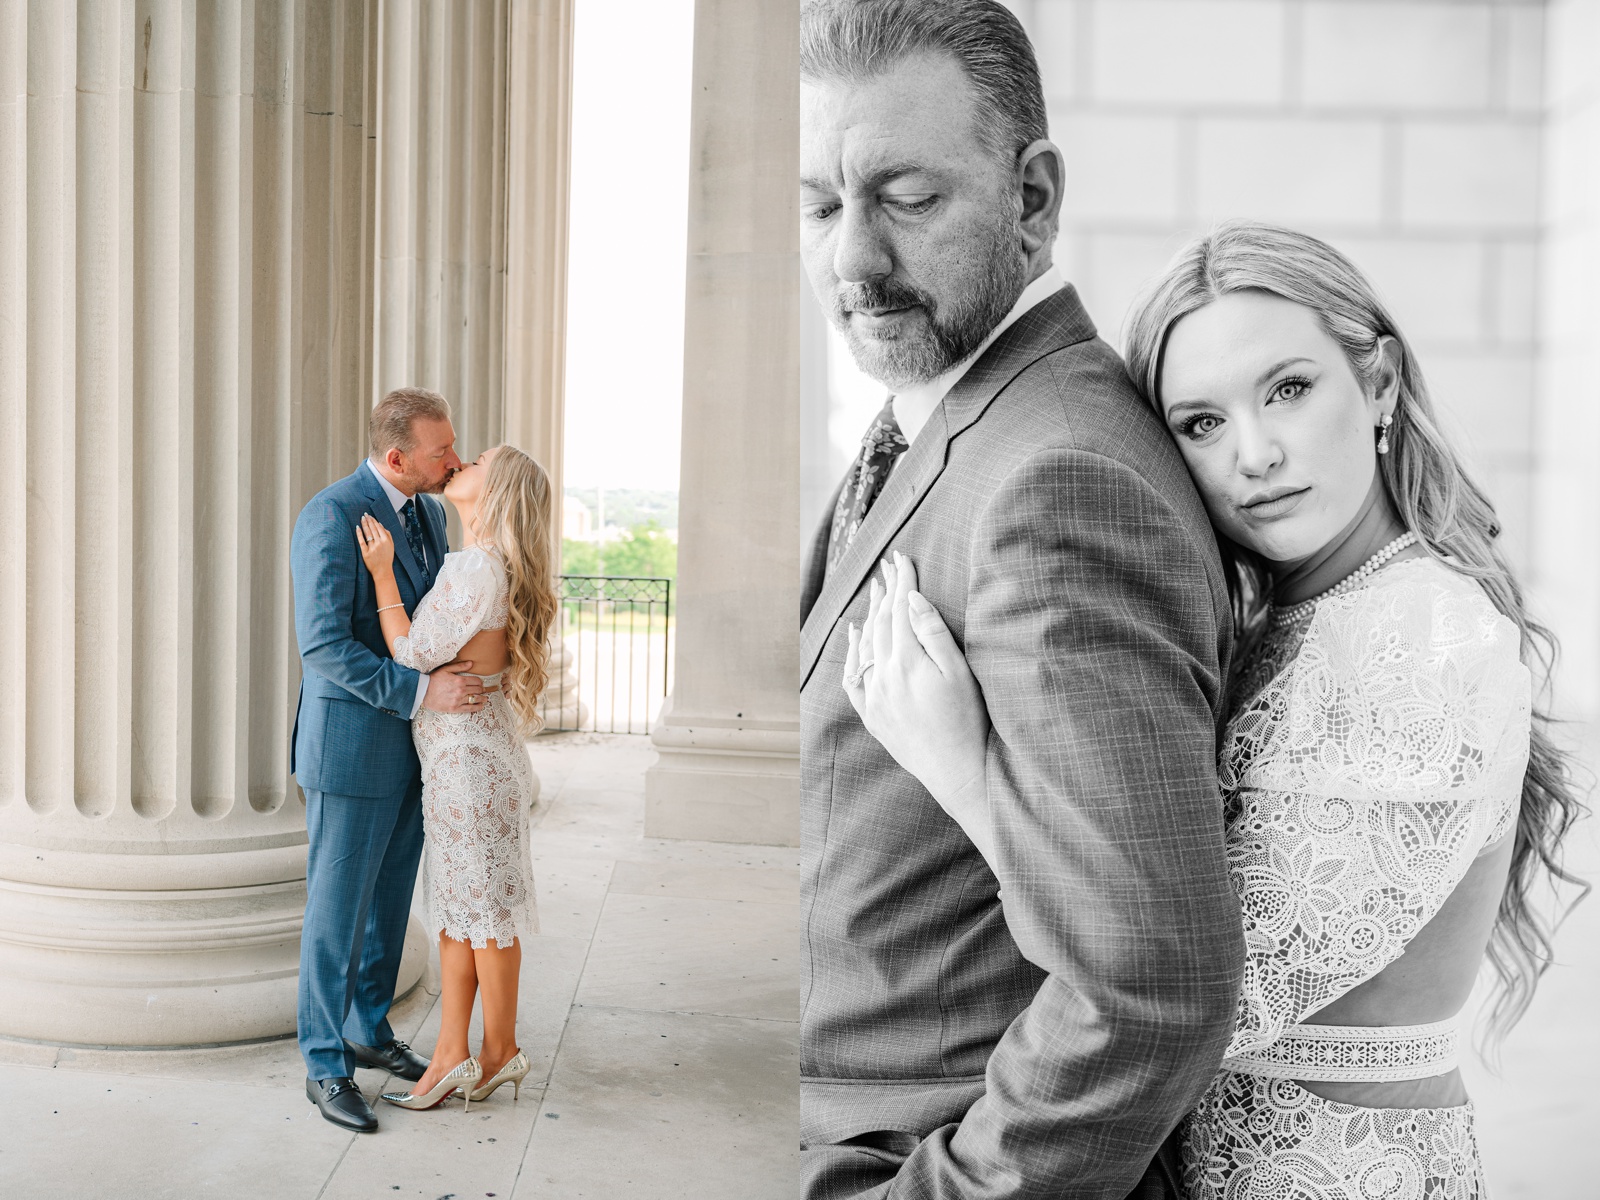 Stambaugh Auditorium and Waypoint 4180 Engagement Session in Youngstown Ohio